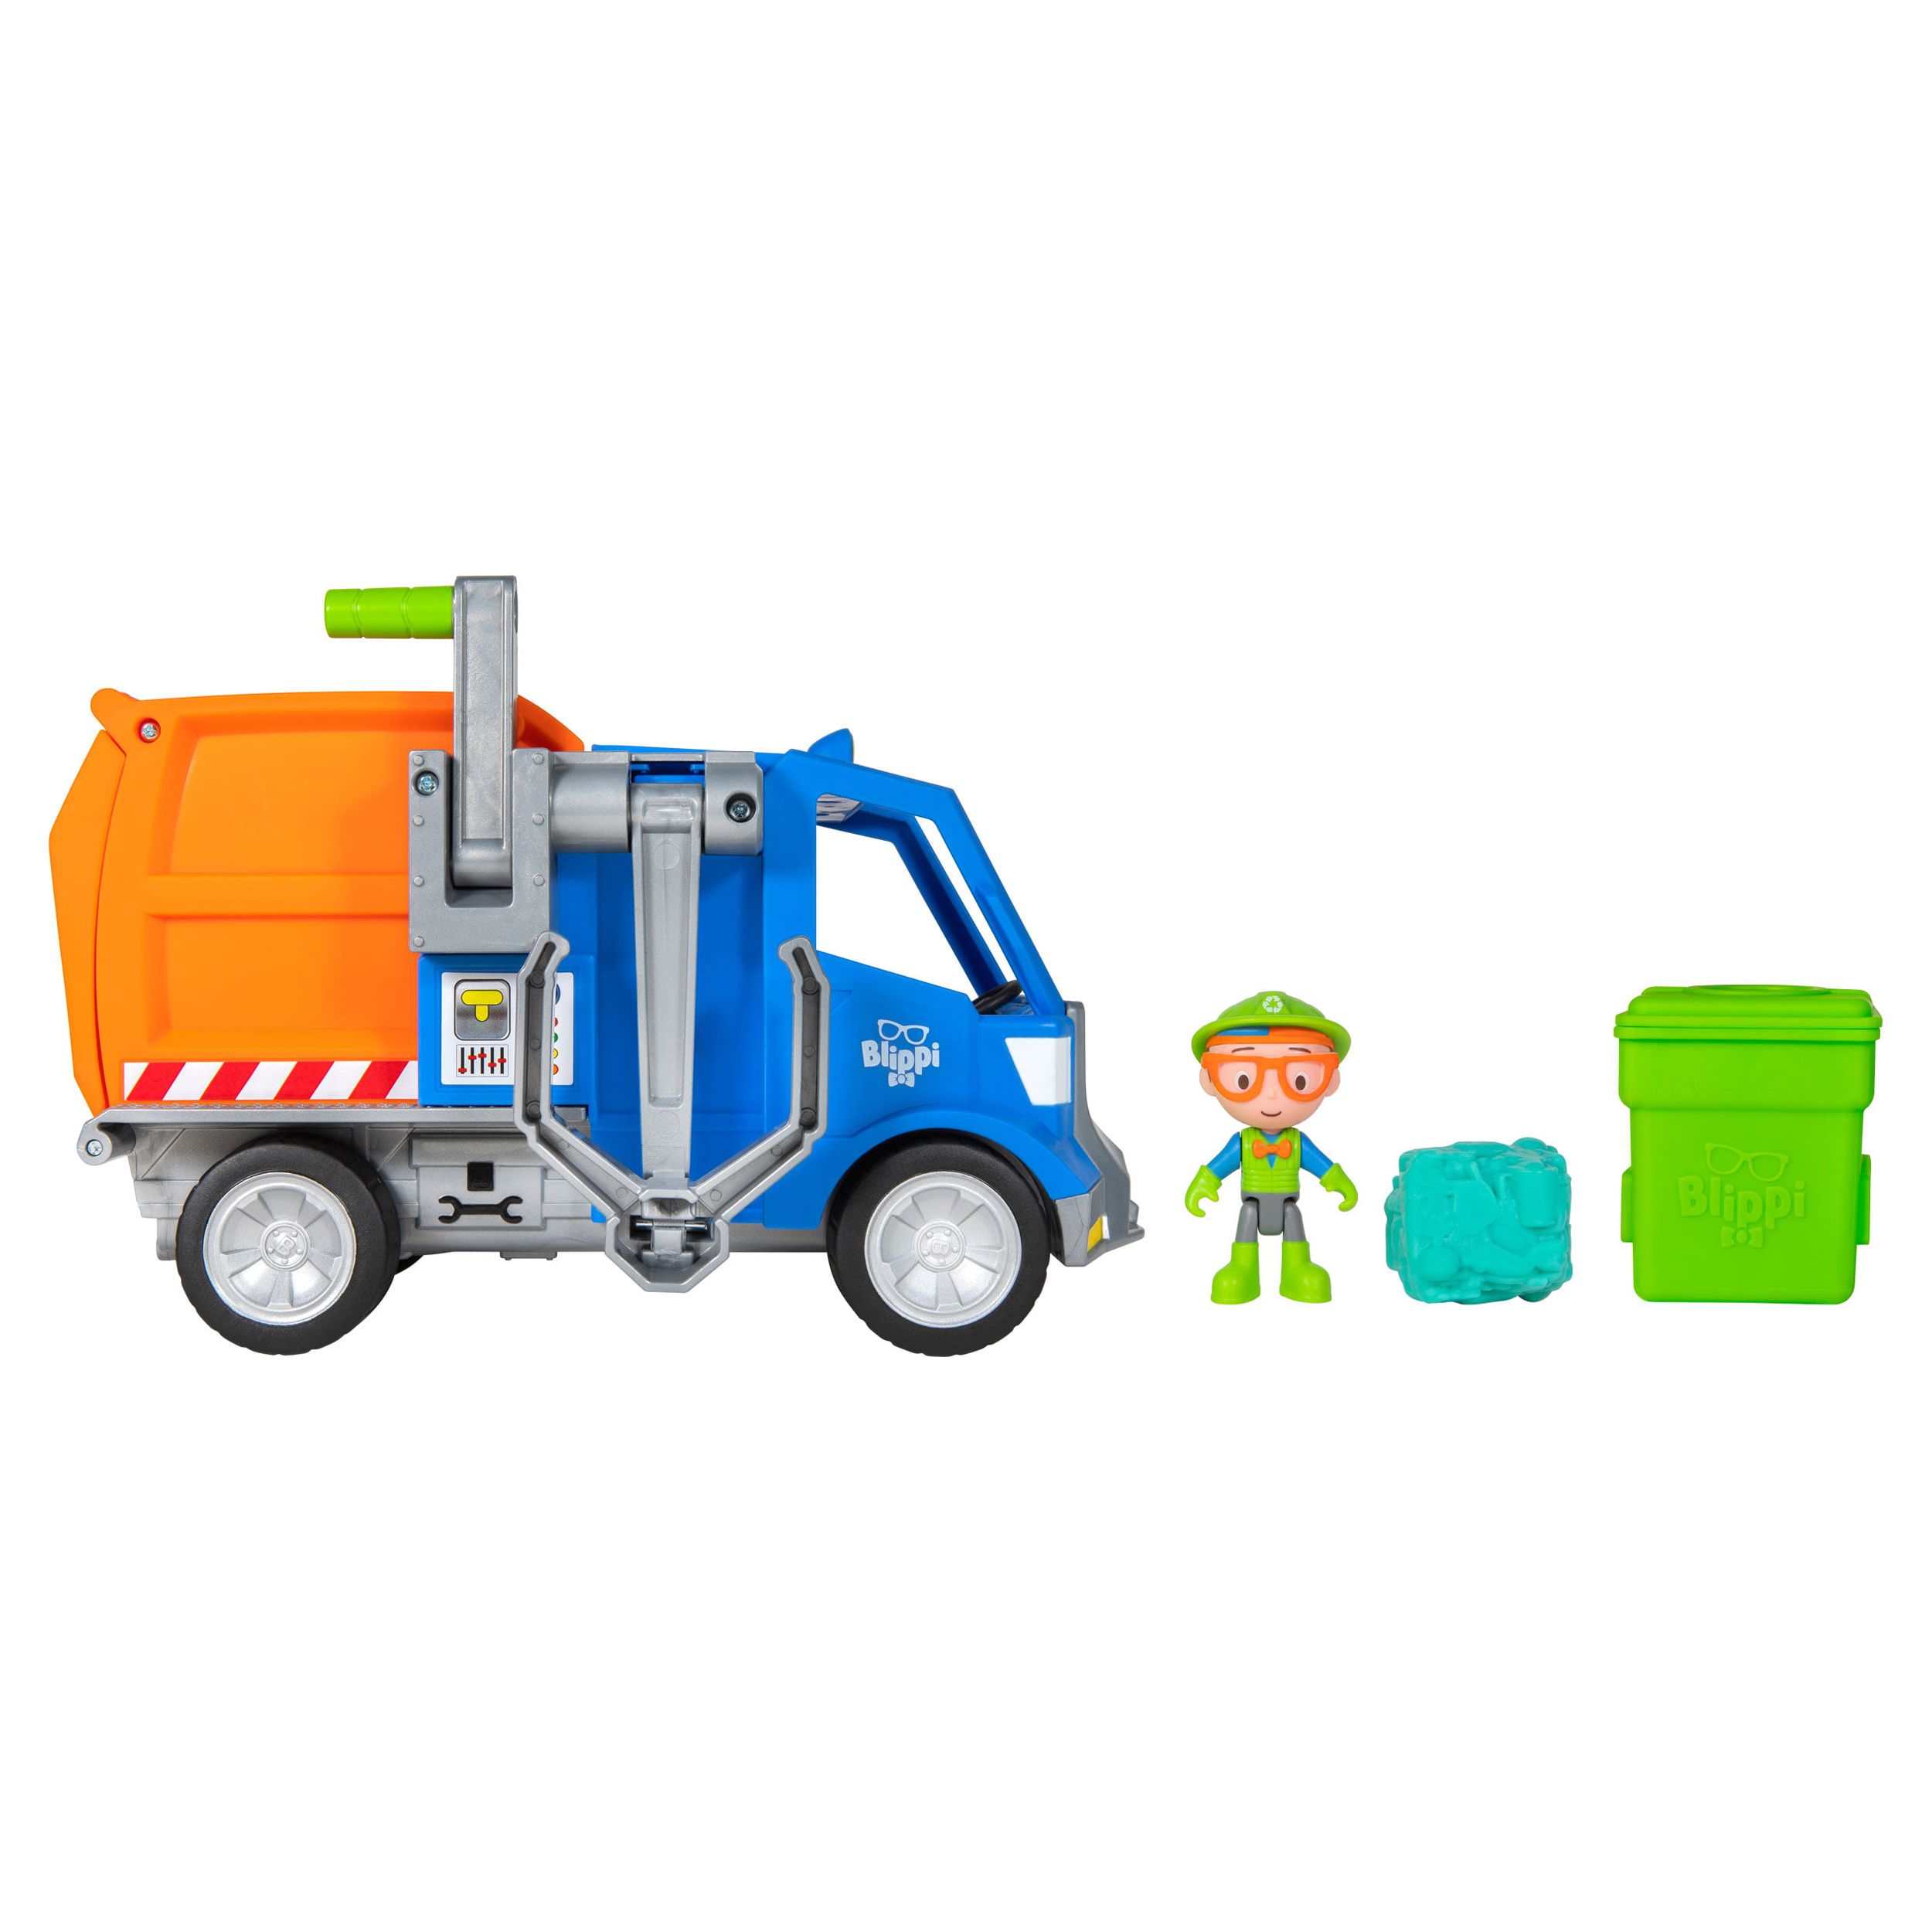 BLIPPI Recycling Truck Play Vehicle - image 5 of 18